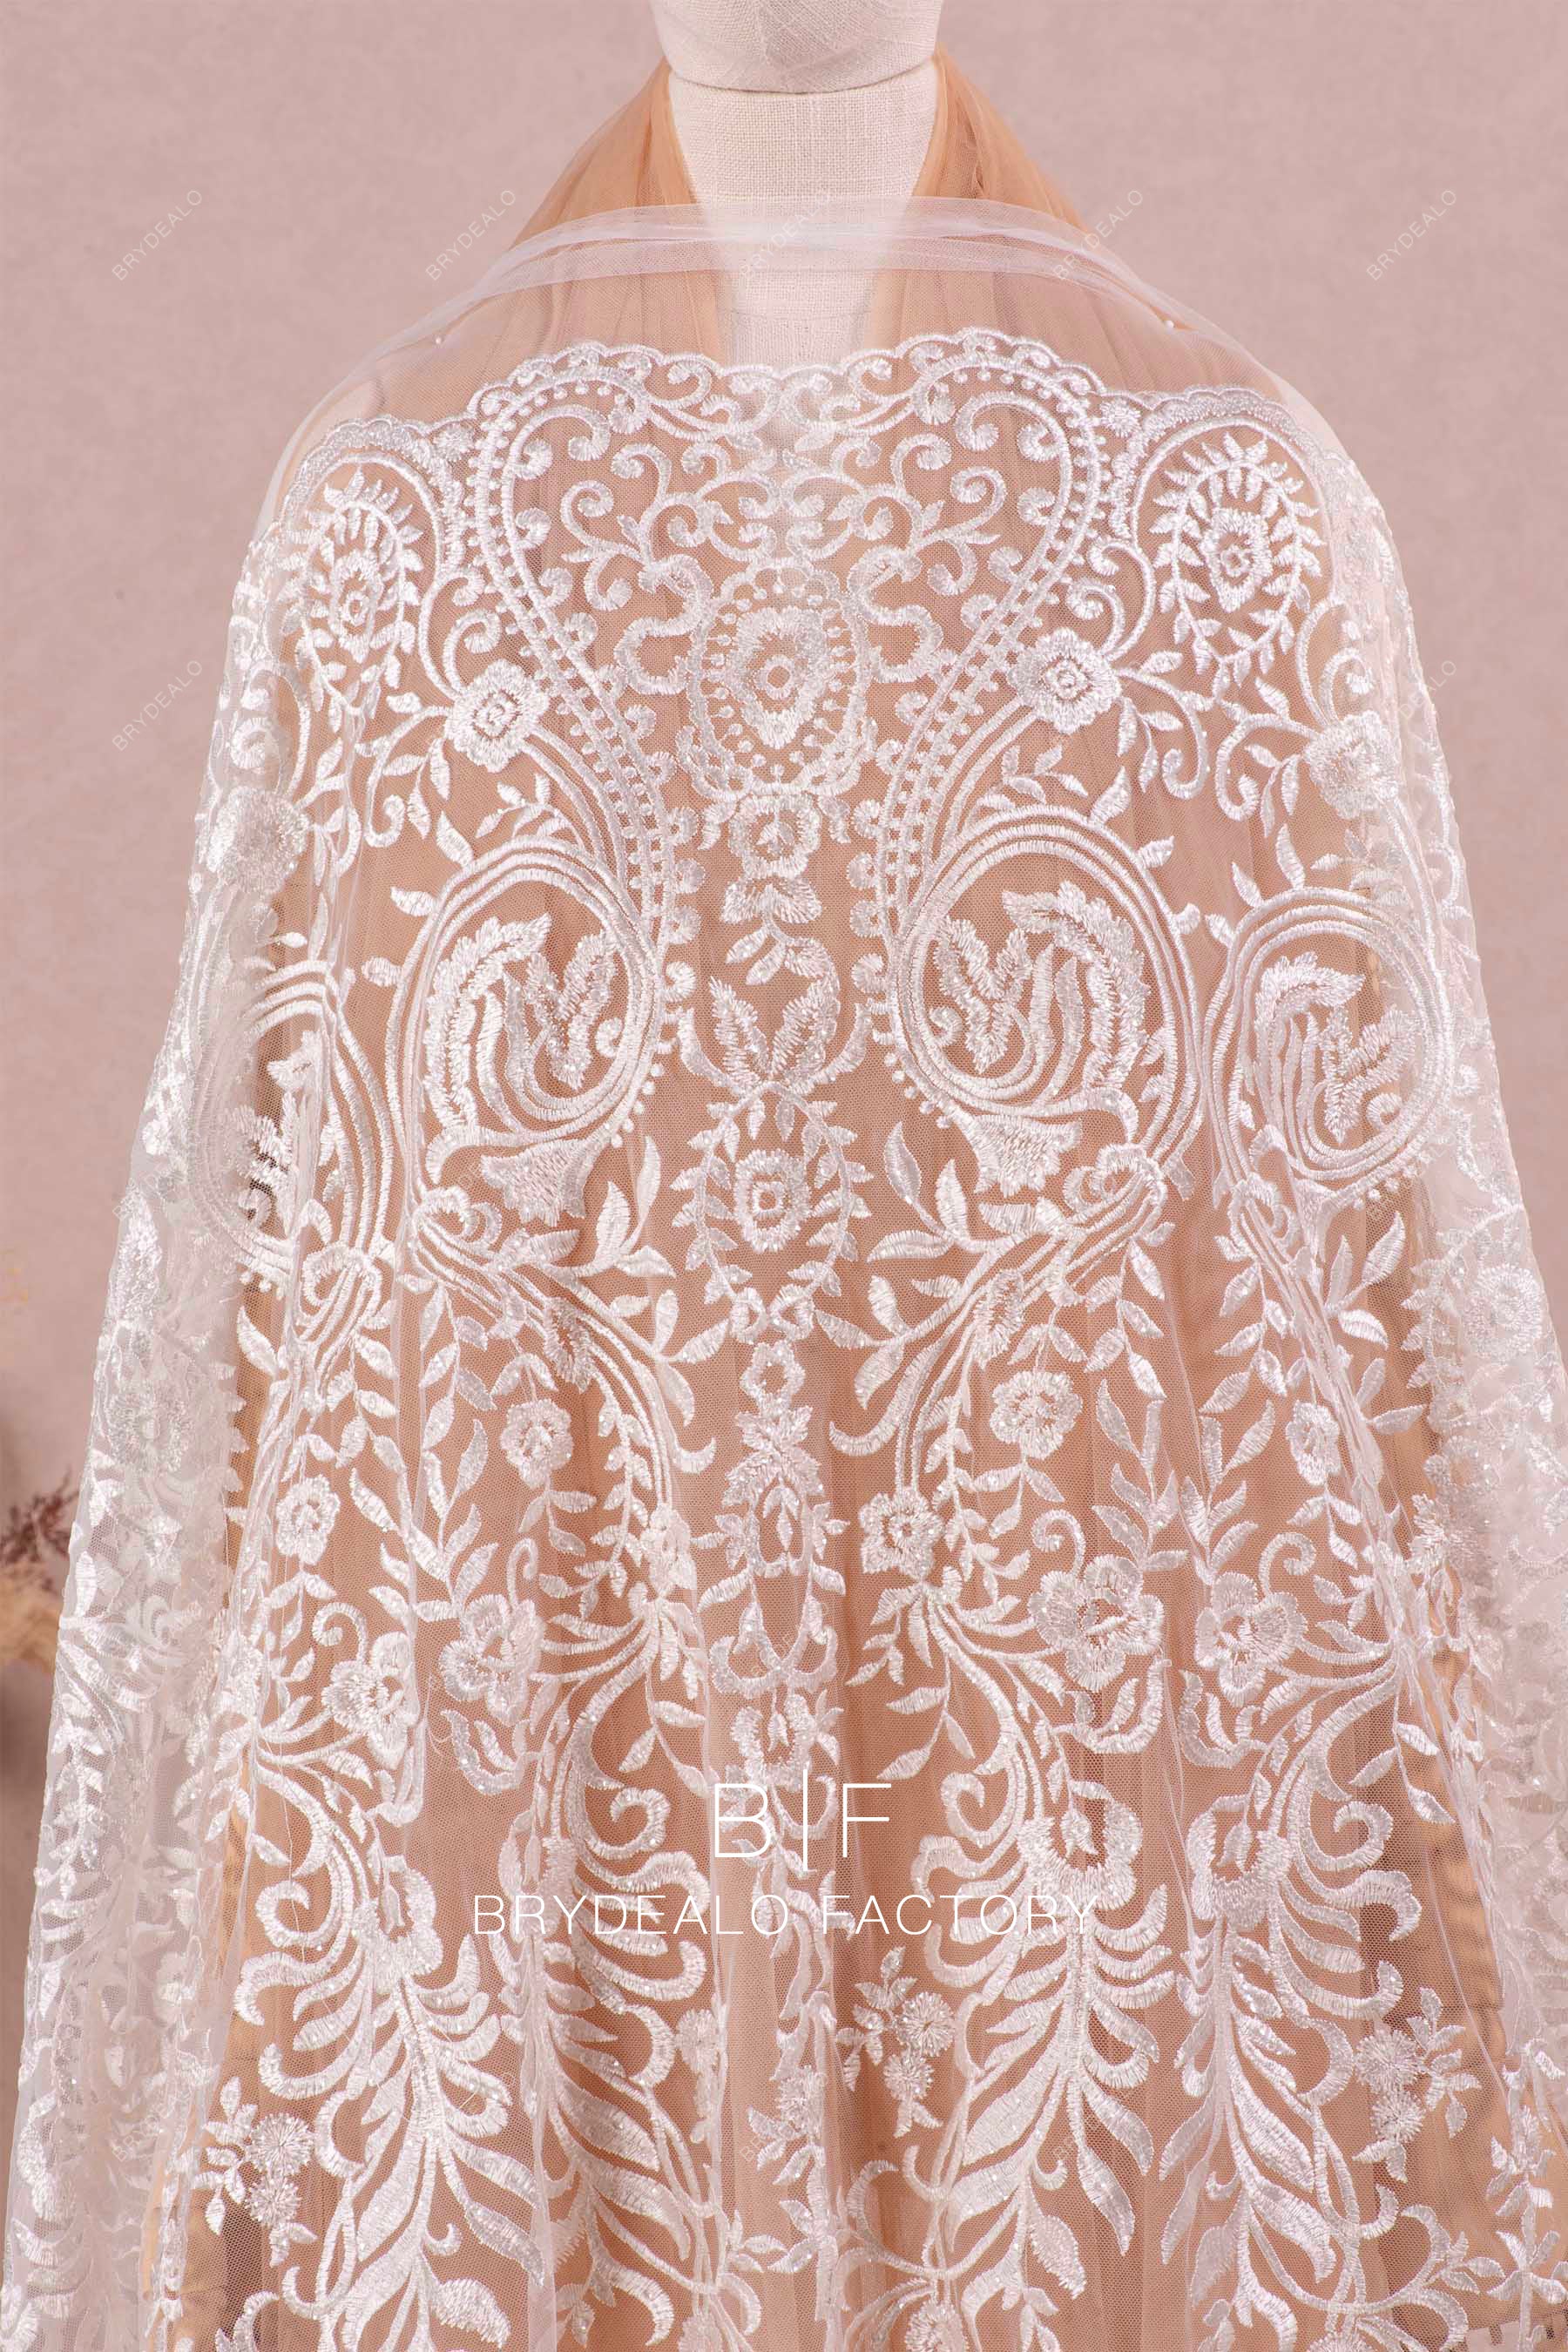 shimmery abstract pattern lace fabric